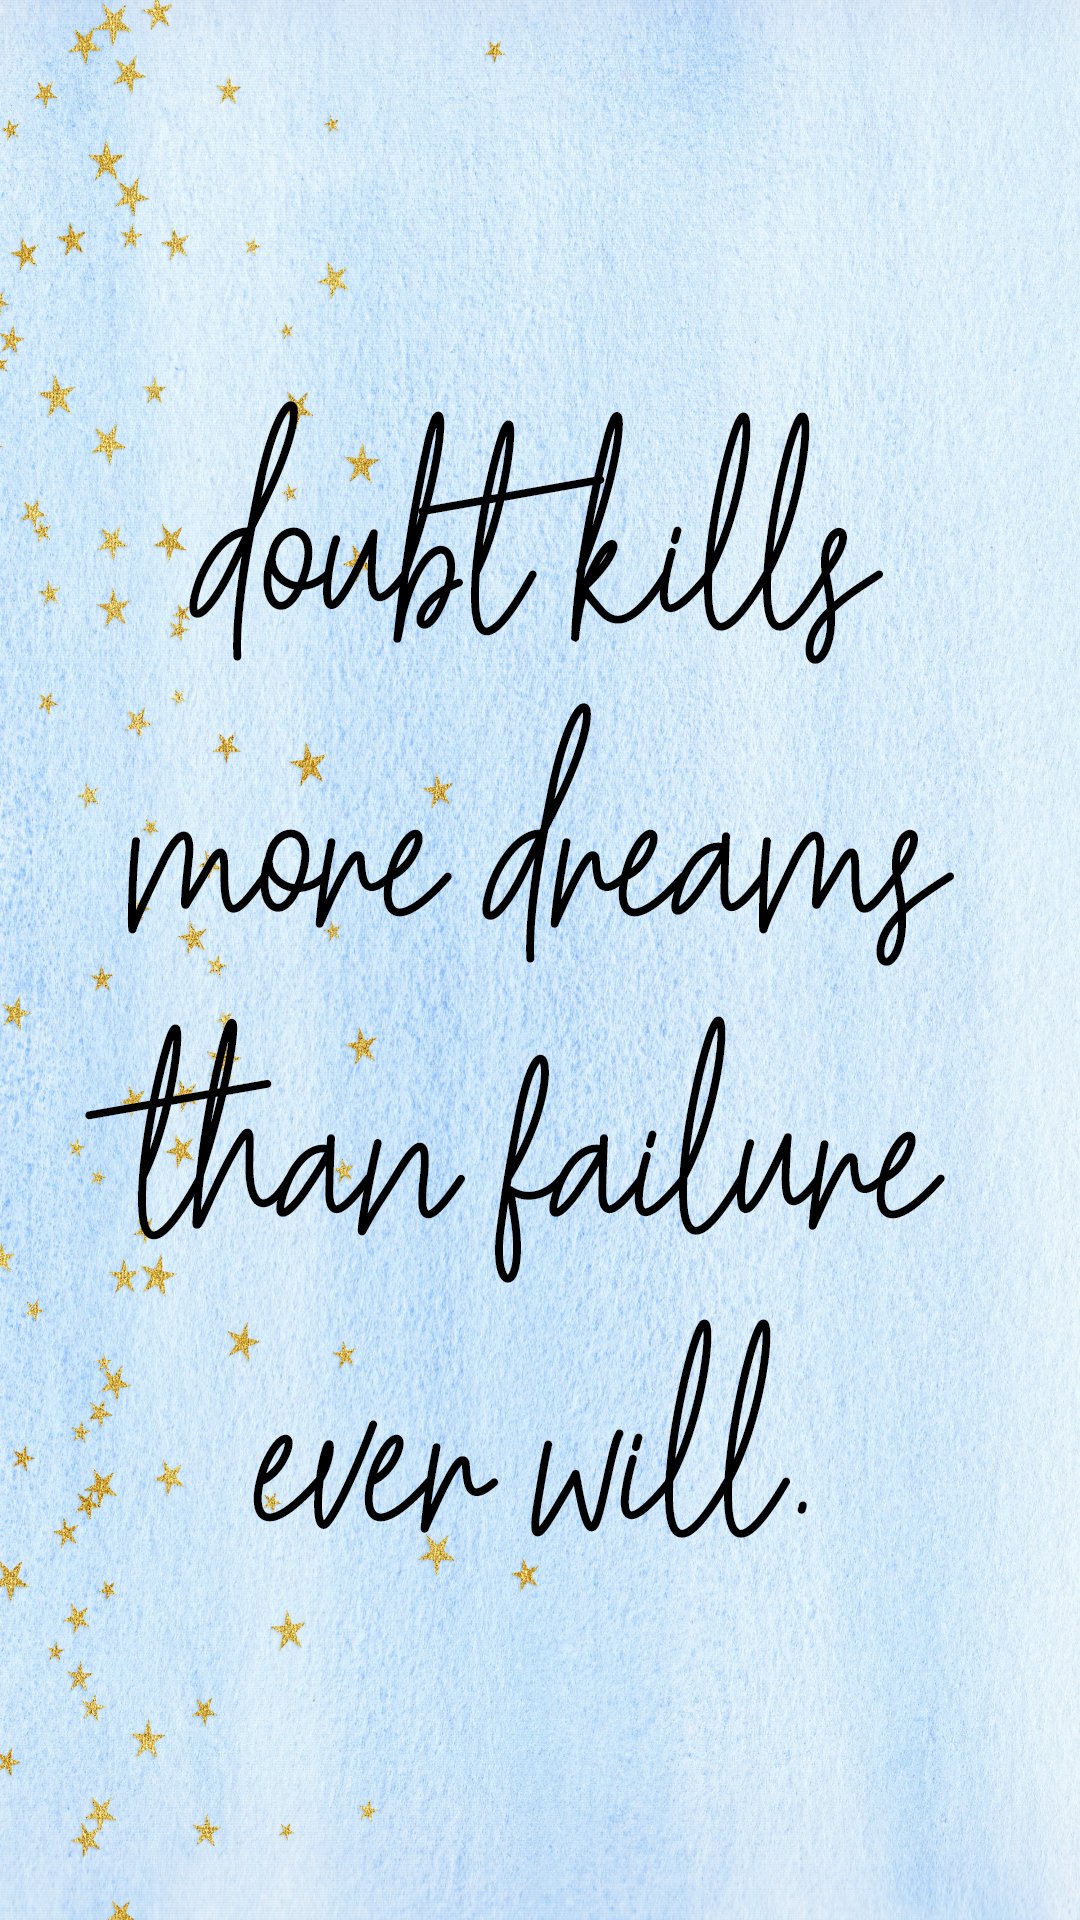 Phone Wallpaper, Phone Background, Quotes To Live By, - Iphone Wallpaper Failure Quote - HD Wallpaper 